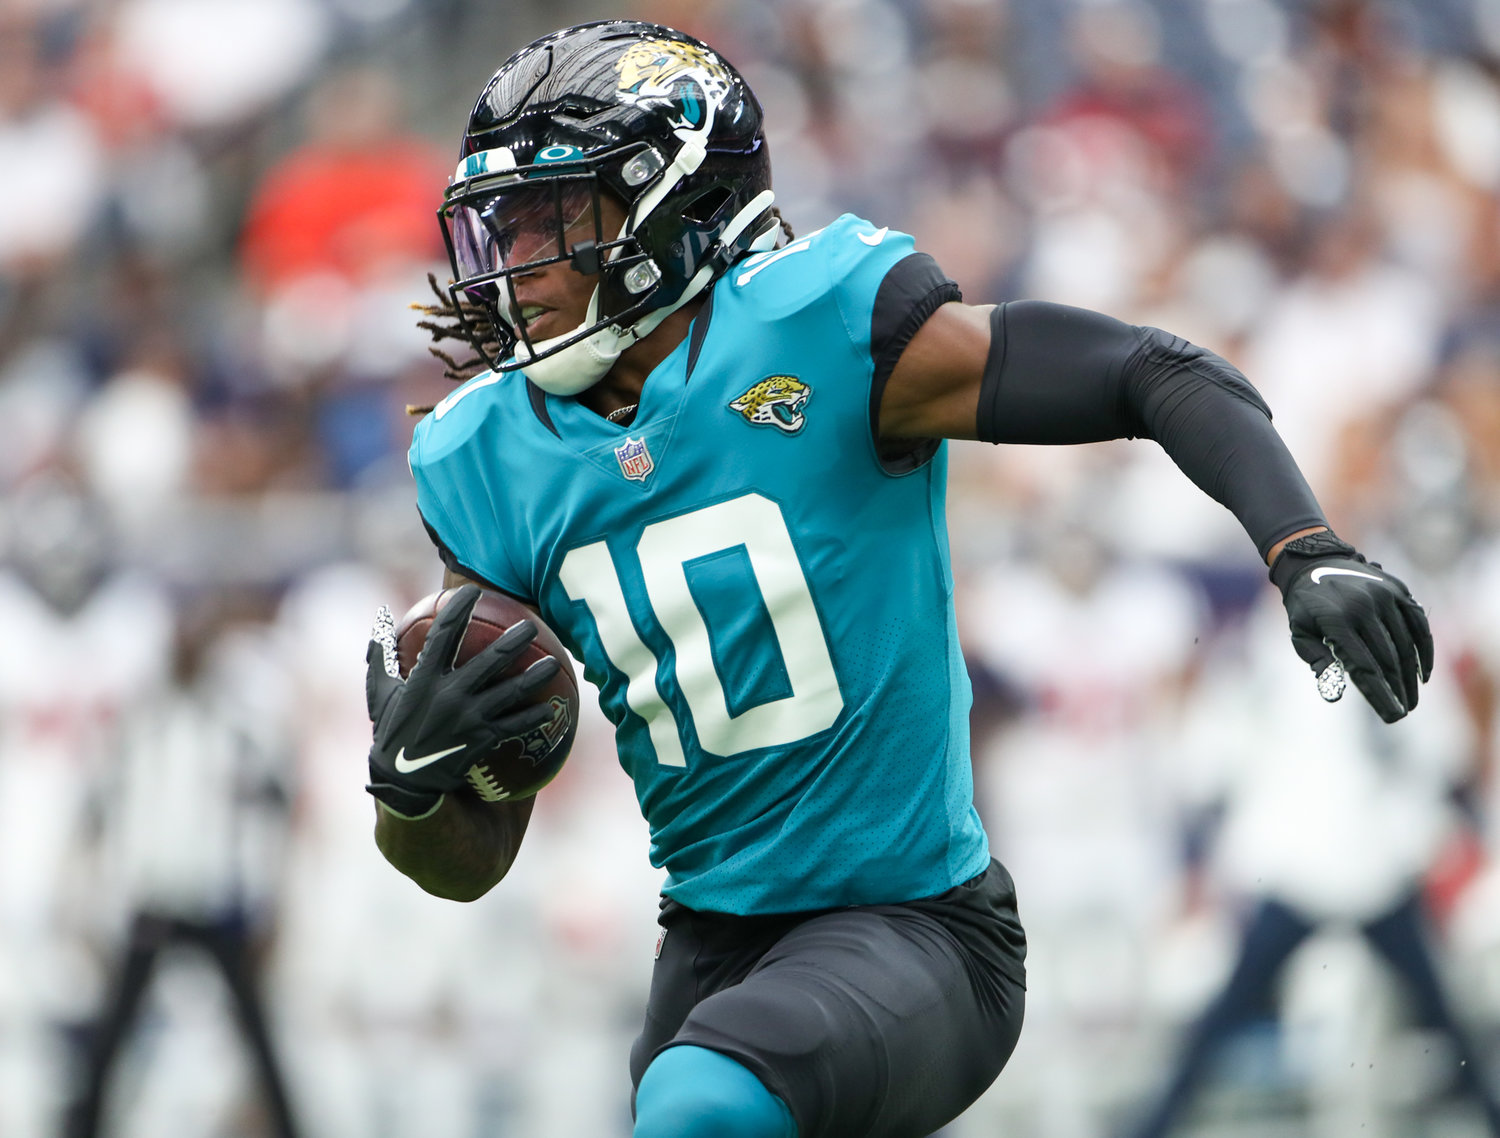 Jacksonville Jaguars wide receiver Laviska Shenault Jr. (10) carries the ball during the first half of an NFL game between the Houston Texans and the Jacksonville Jaguars on September 12, 2021 in Houston, Texas.